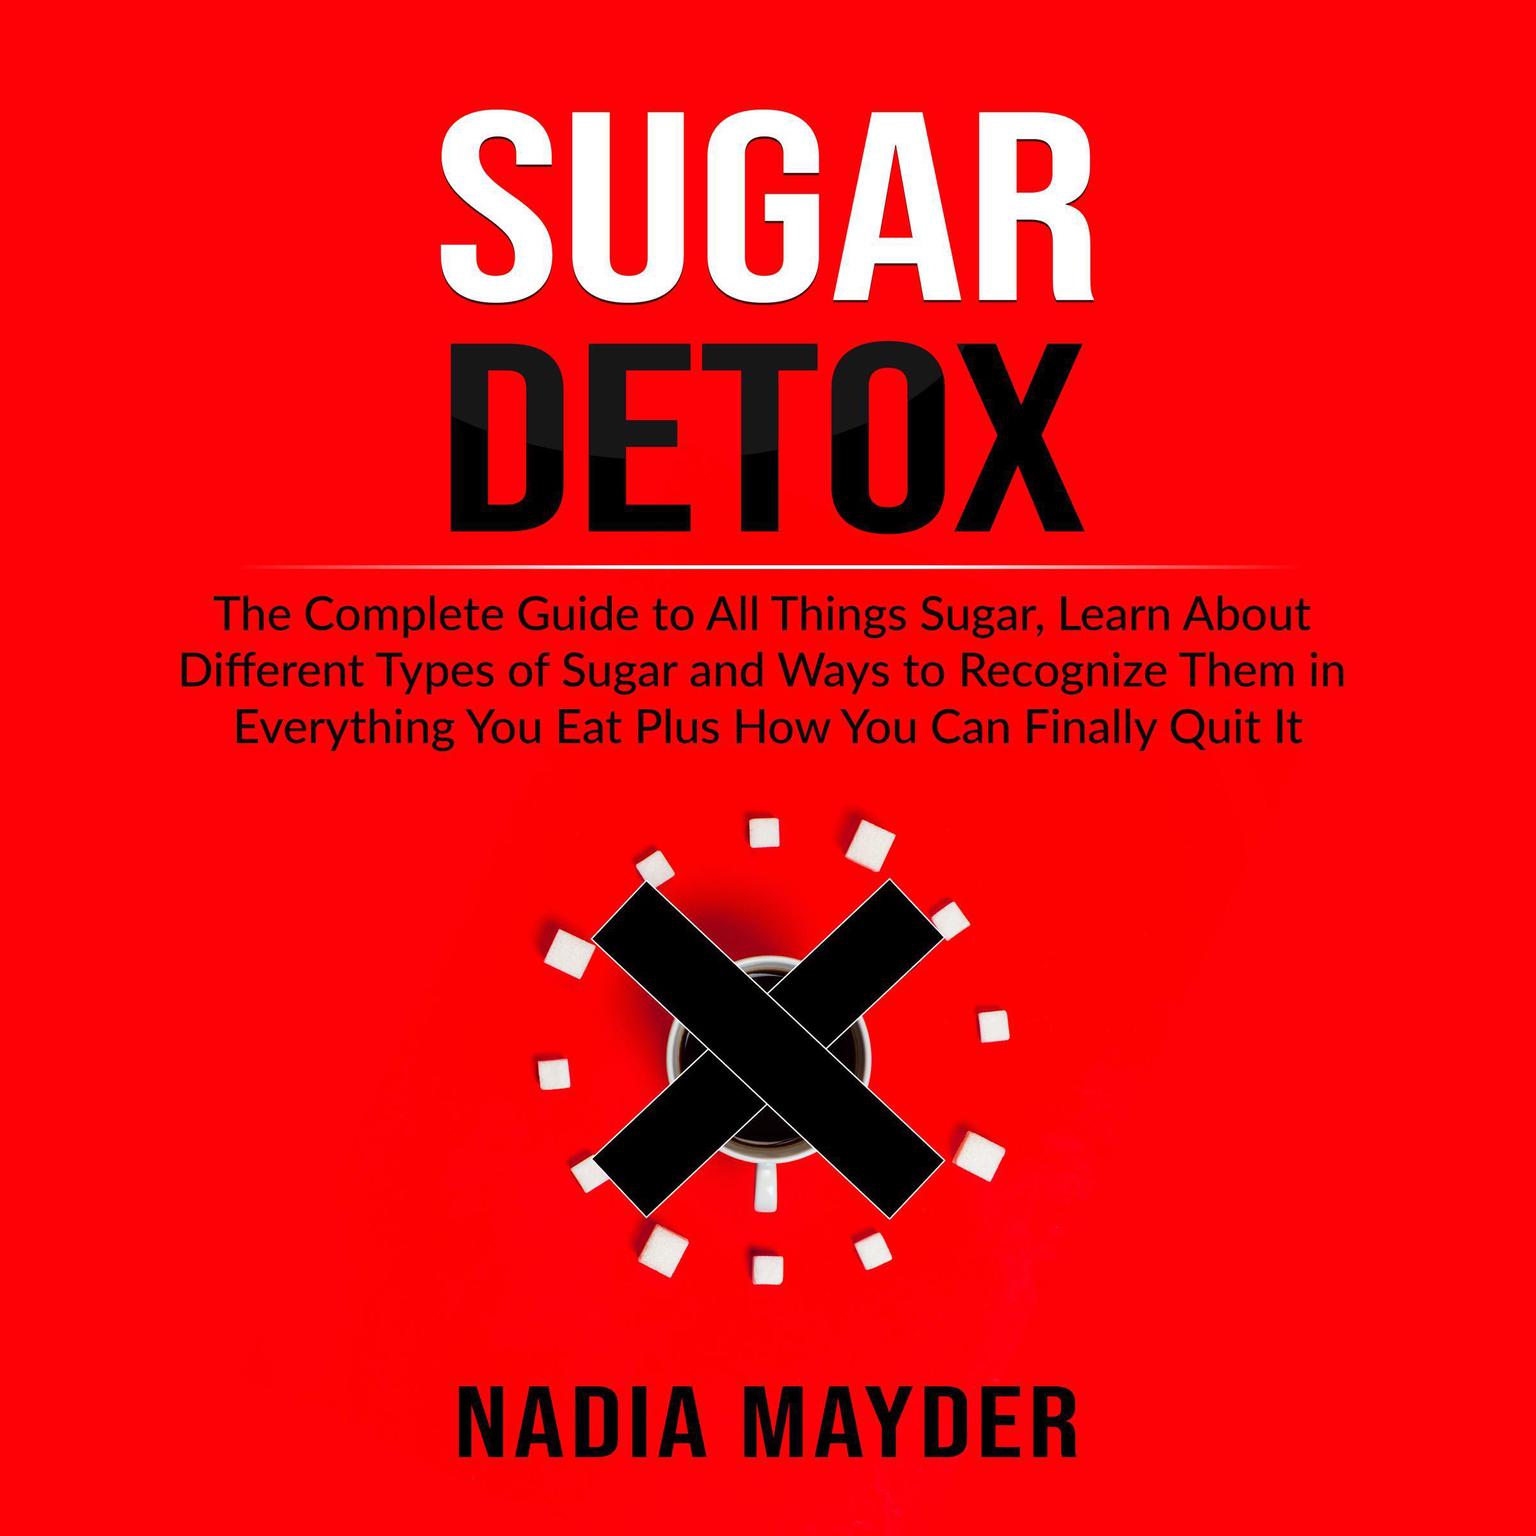 Sugar Detox: The Complete Guide to All Things Sugar, Learn About Different Types of Sugar and Ways to Recognize Them in Everything You Eat Plus How You Can Finally Quit It Audiobook, by Nadia Mayder